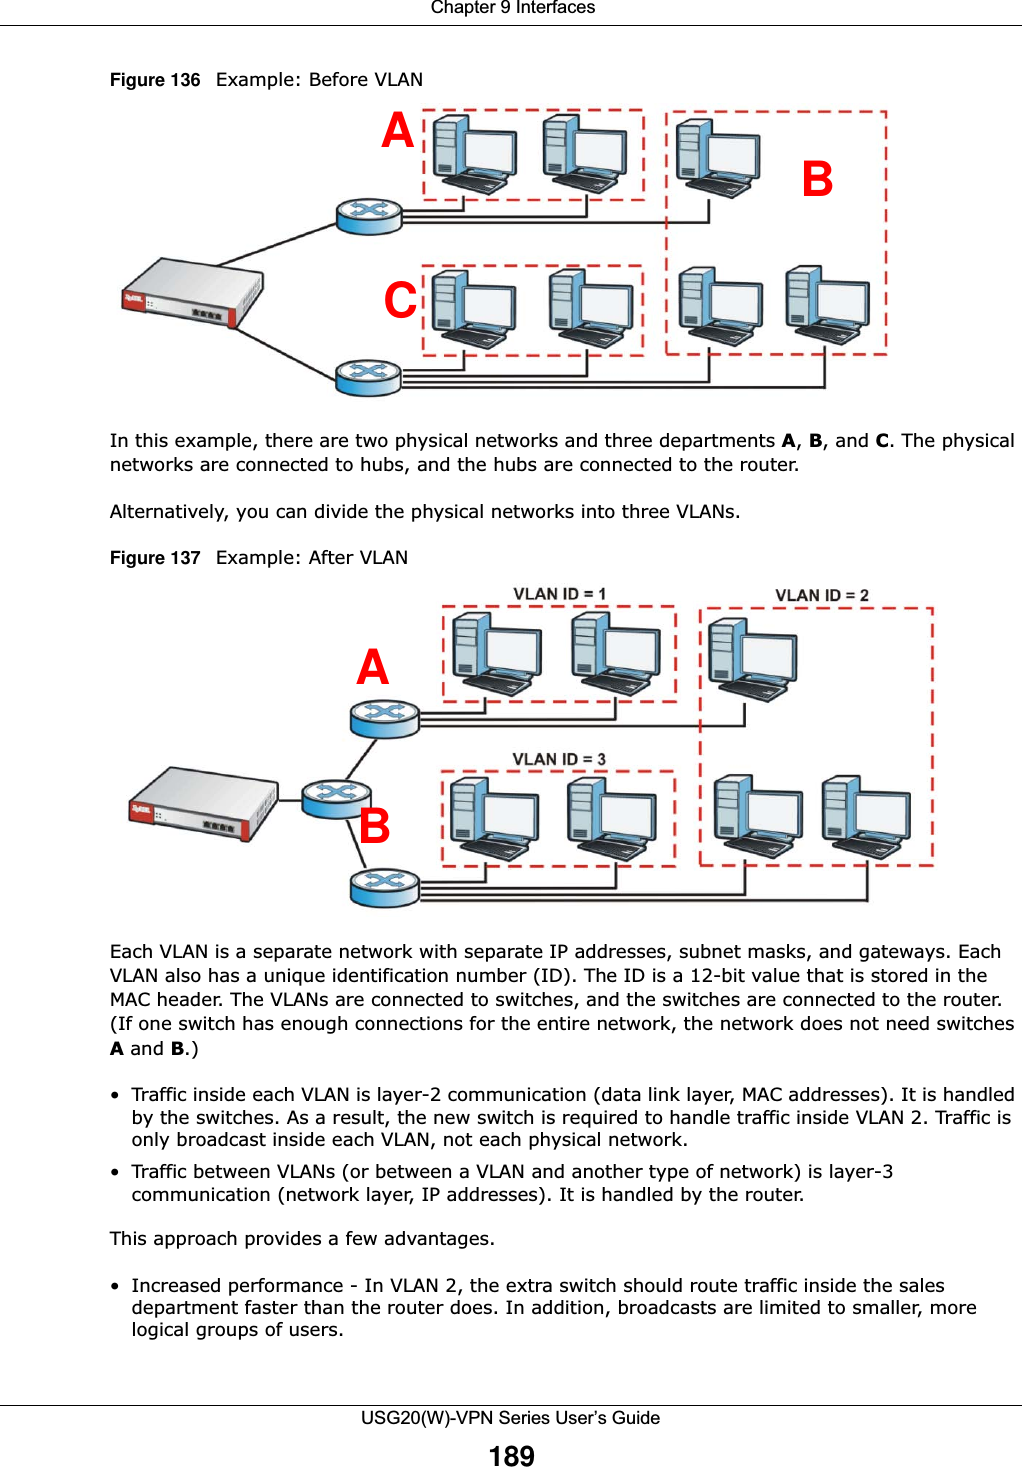  Chapter 9 InterfacesUSG20(W)-VPN Series User’s Guide189Figure 136   Example: Before VLANIn this example, there are two physical networks and three departments A, B, and C. The physical networks are connected to hubs, and the hubs are connected to the router.Alternatively, you can divide the physical networks into three VLANs.Figure 137   Example: After VLANEach VLAN is a separate network with separate IP addresses, subnet masks, and gateways. Each VLAN also has a unique identification number (ID). The ID is a 12-bit value that is stored in the MAC header. The VLANs are connected to switches, and the switches are connected to the router. (If one switch has enough connections for the entire network, the network does not need switches A and B.)• Traffic inside each VLAN is layer-2 communication (data link layer, MAC addresses). It is handled by the switches. As a result, the new switch is required to handle traffic inside VLAN 2. Traffic is only broadcast inside each VLAN, not each physical network.• Traffic between VLANs (or between a VLAN and another type of network) is layer-3 communication (network layer, IP addresses). It is handled by the router.This approach provides a few advantages.• Increased performance - In VLAN 2, the extra switch should route traffic inside the sales department faster than the router does. In addition, broadcasts are limited to smaller, more logical groups of users.ABCAB